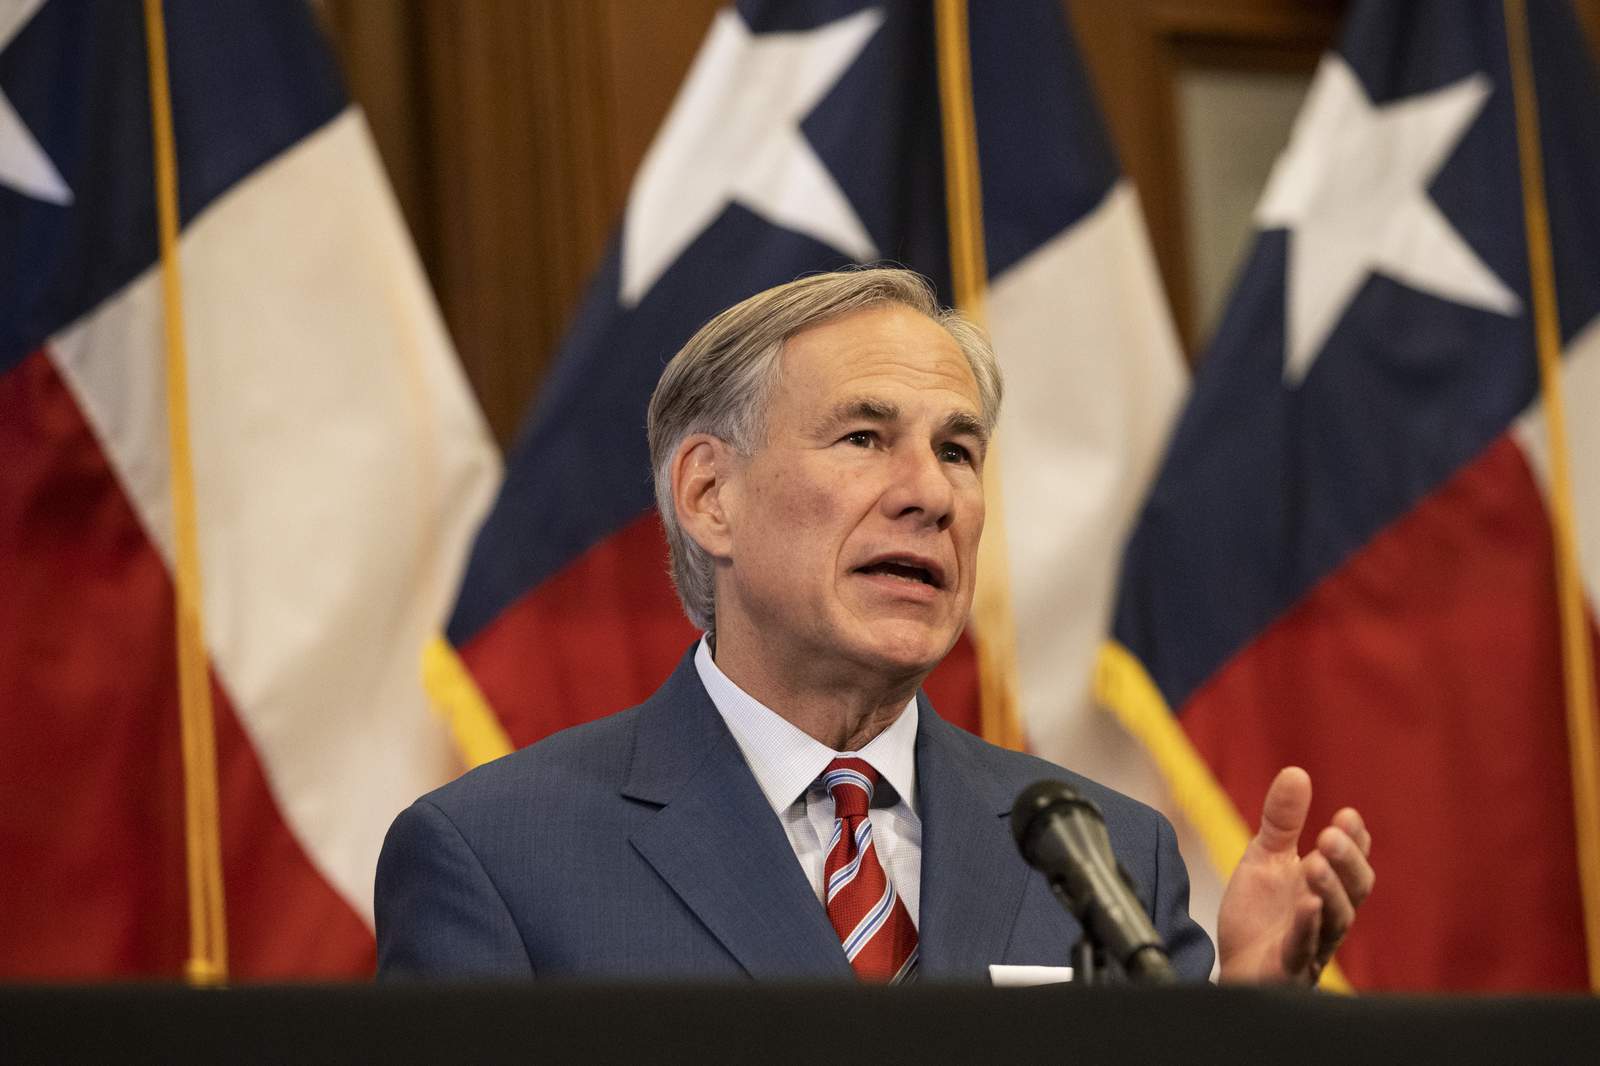 Gov. Abbott extends emergency SNAP benefits due to COVID-19 pandemic